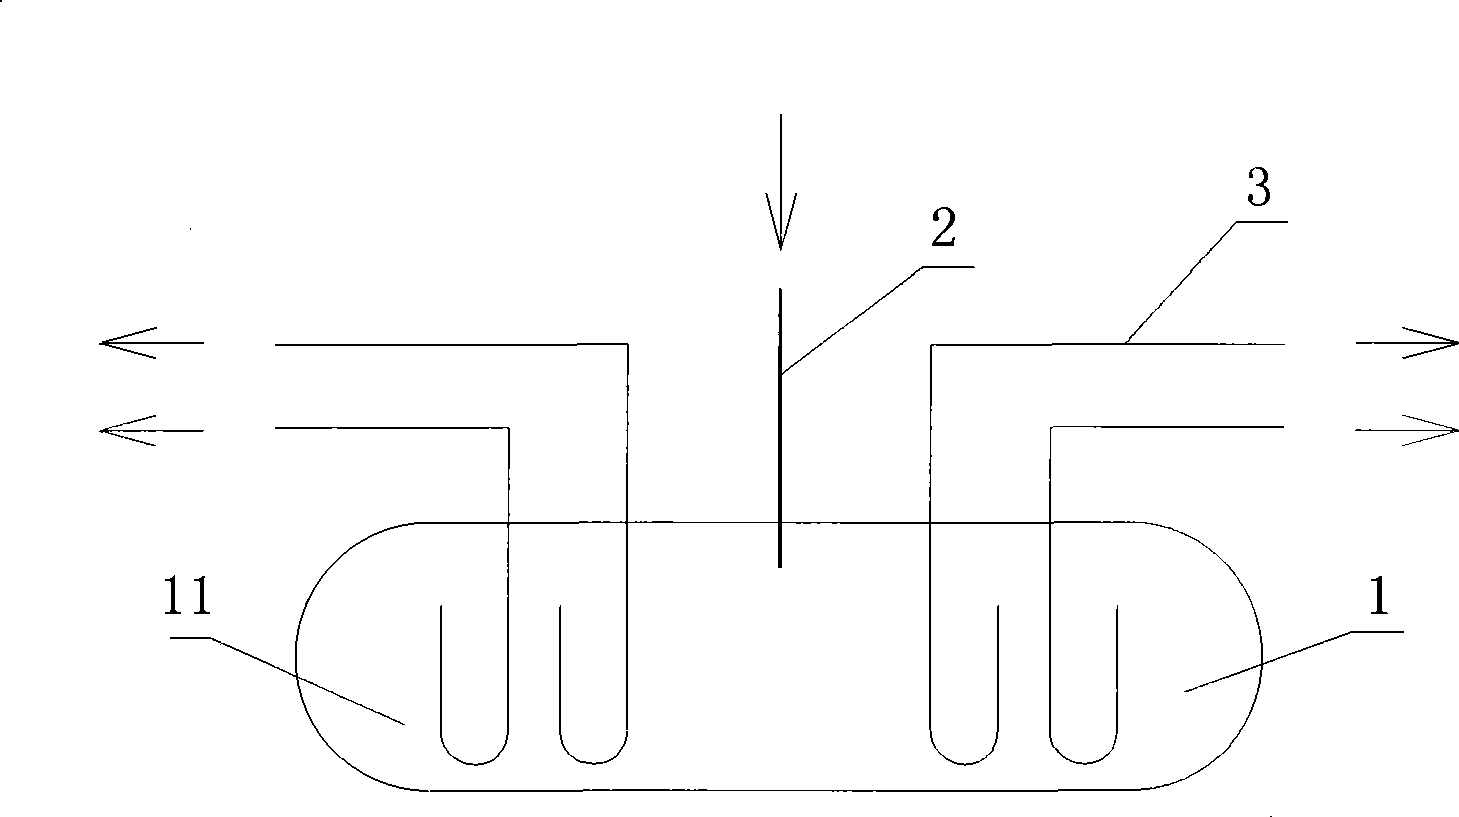 Gas-liquid separator suitable for air conditioning system with multi-compressor parallel connection